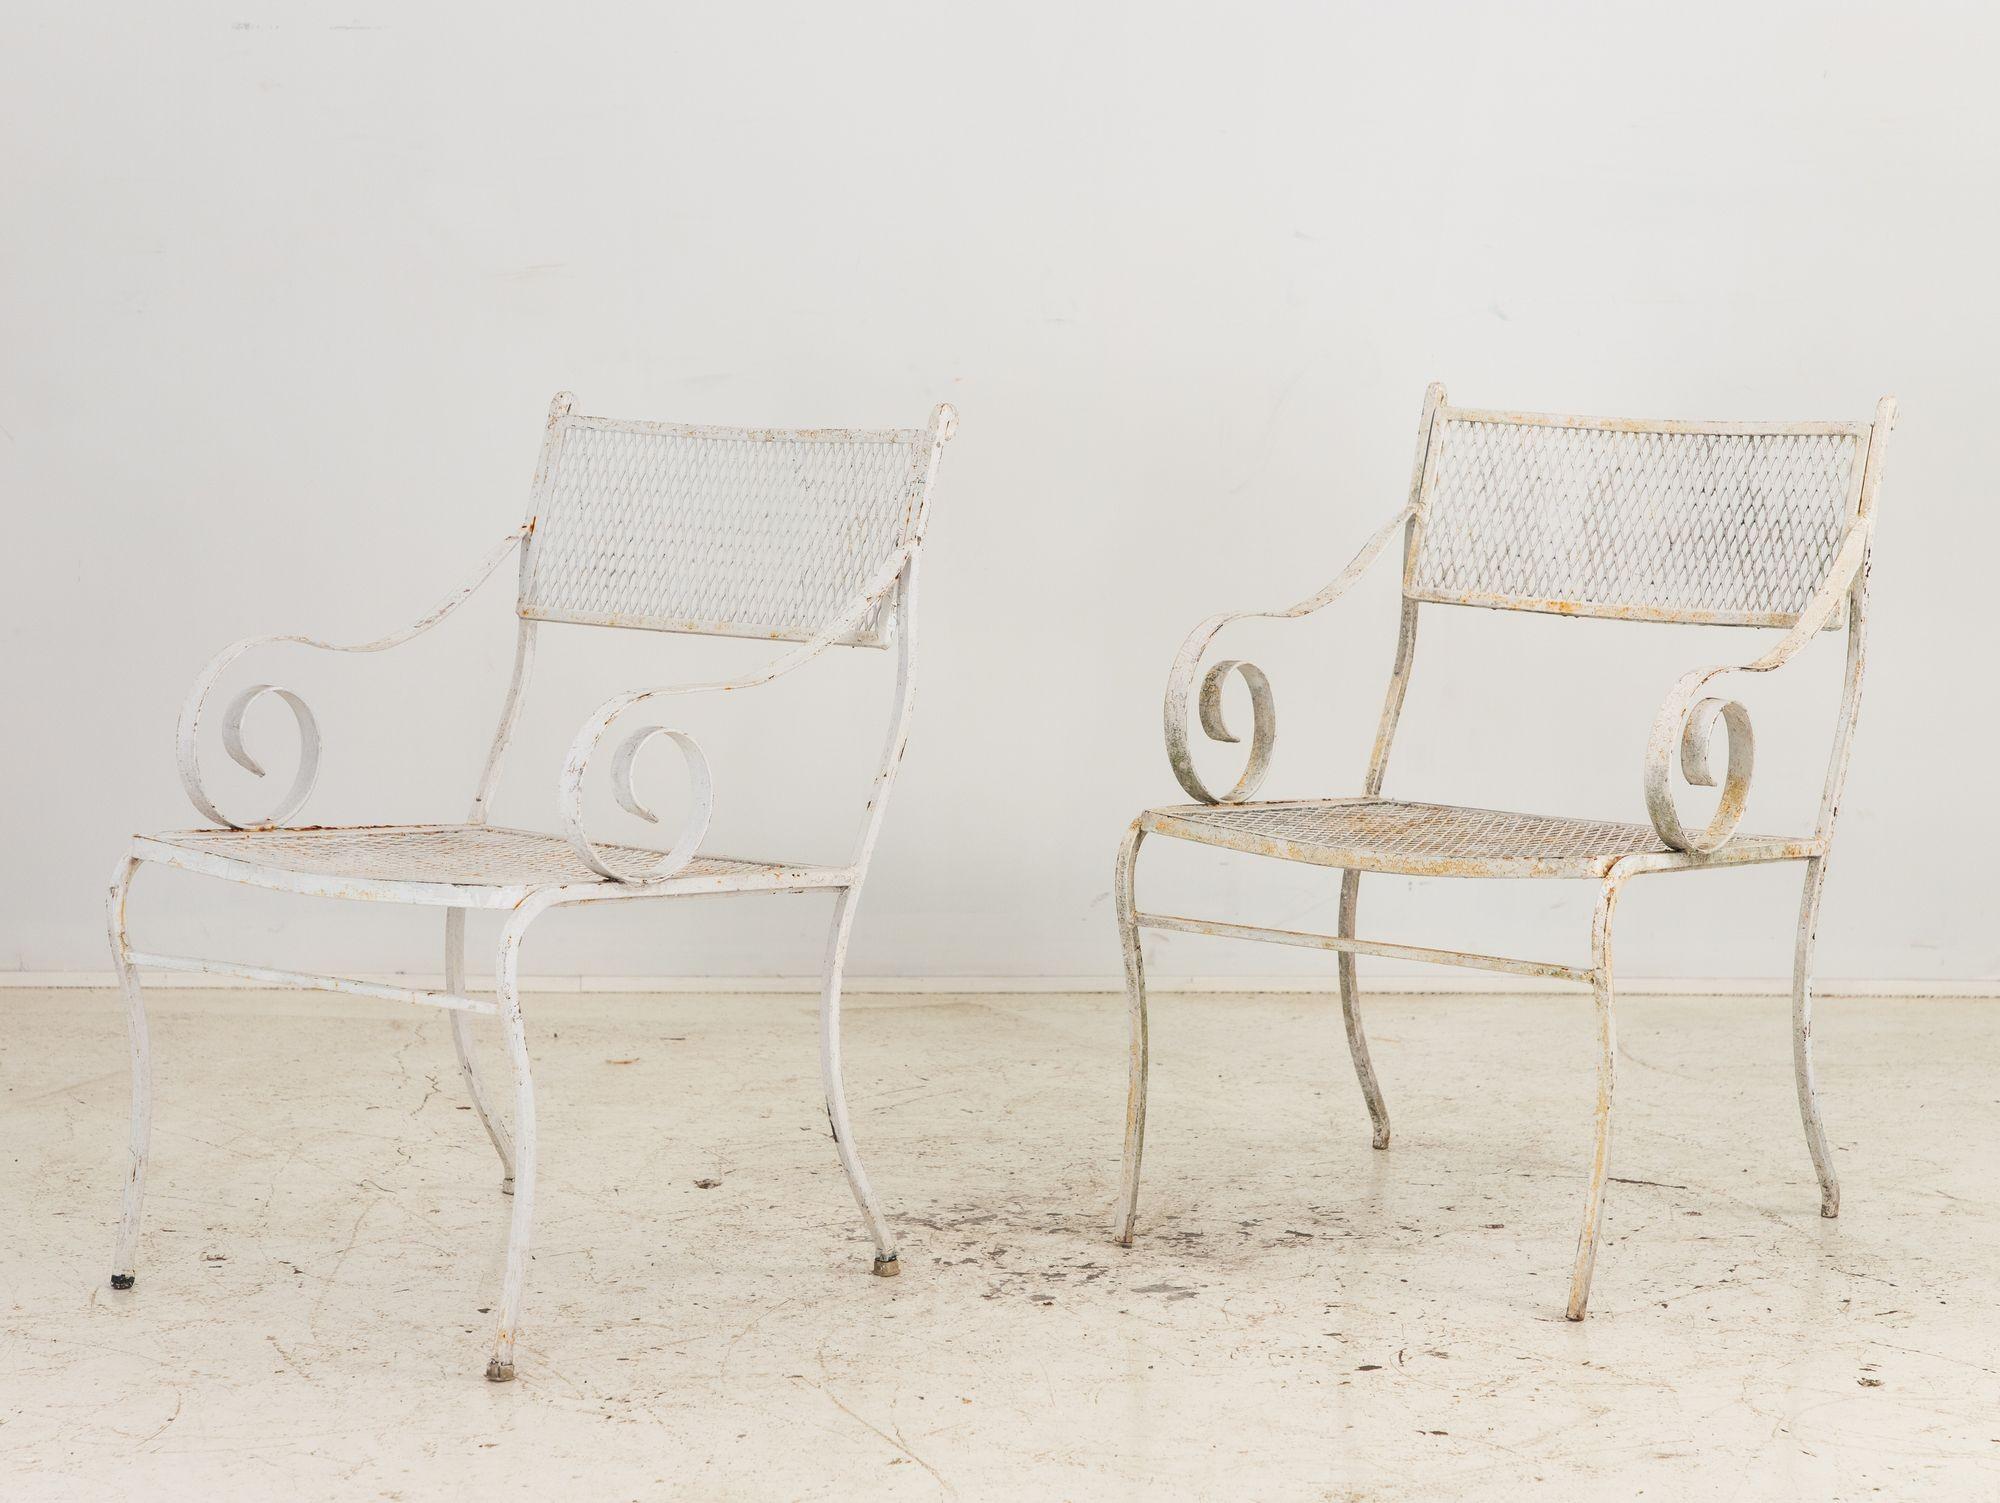 Pair White Painted Metal Garden Chairs, American mid 20th Century In Good Condition For Sale In South Salem, NY